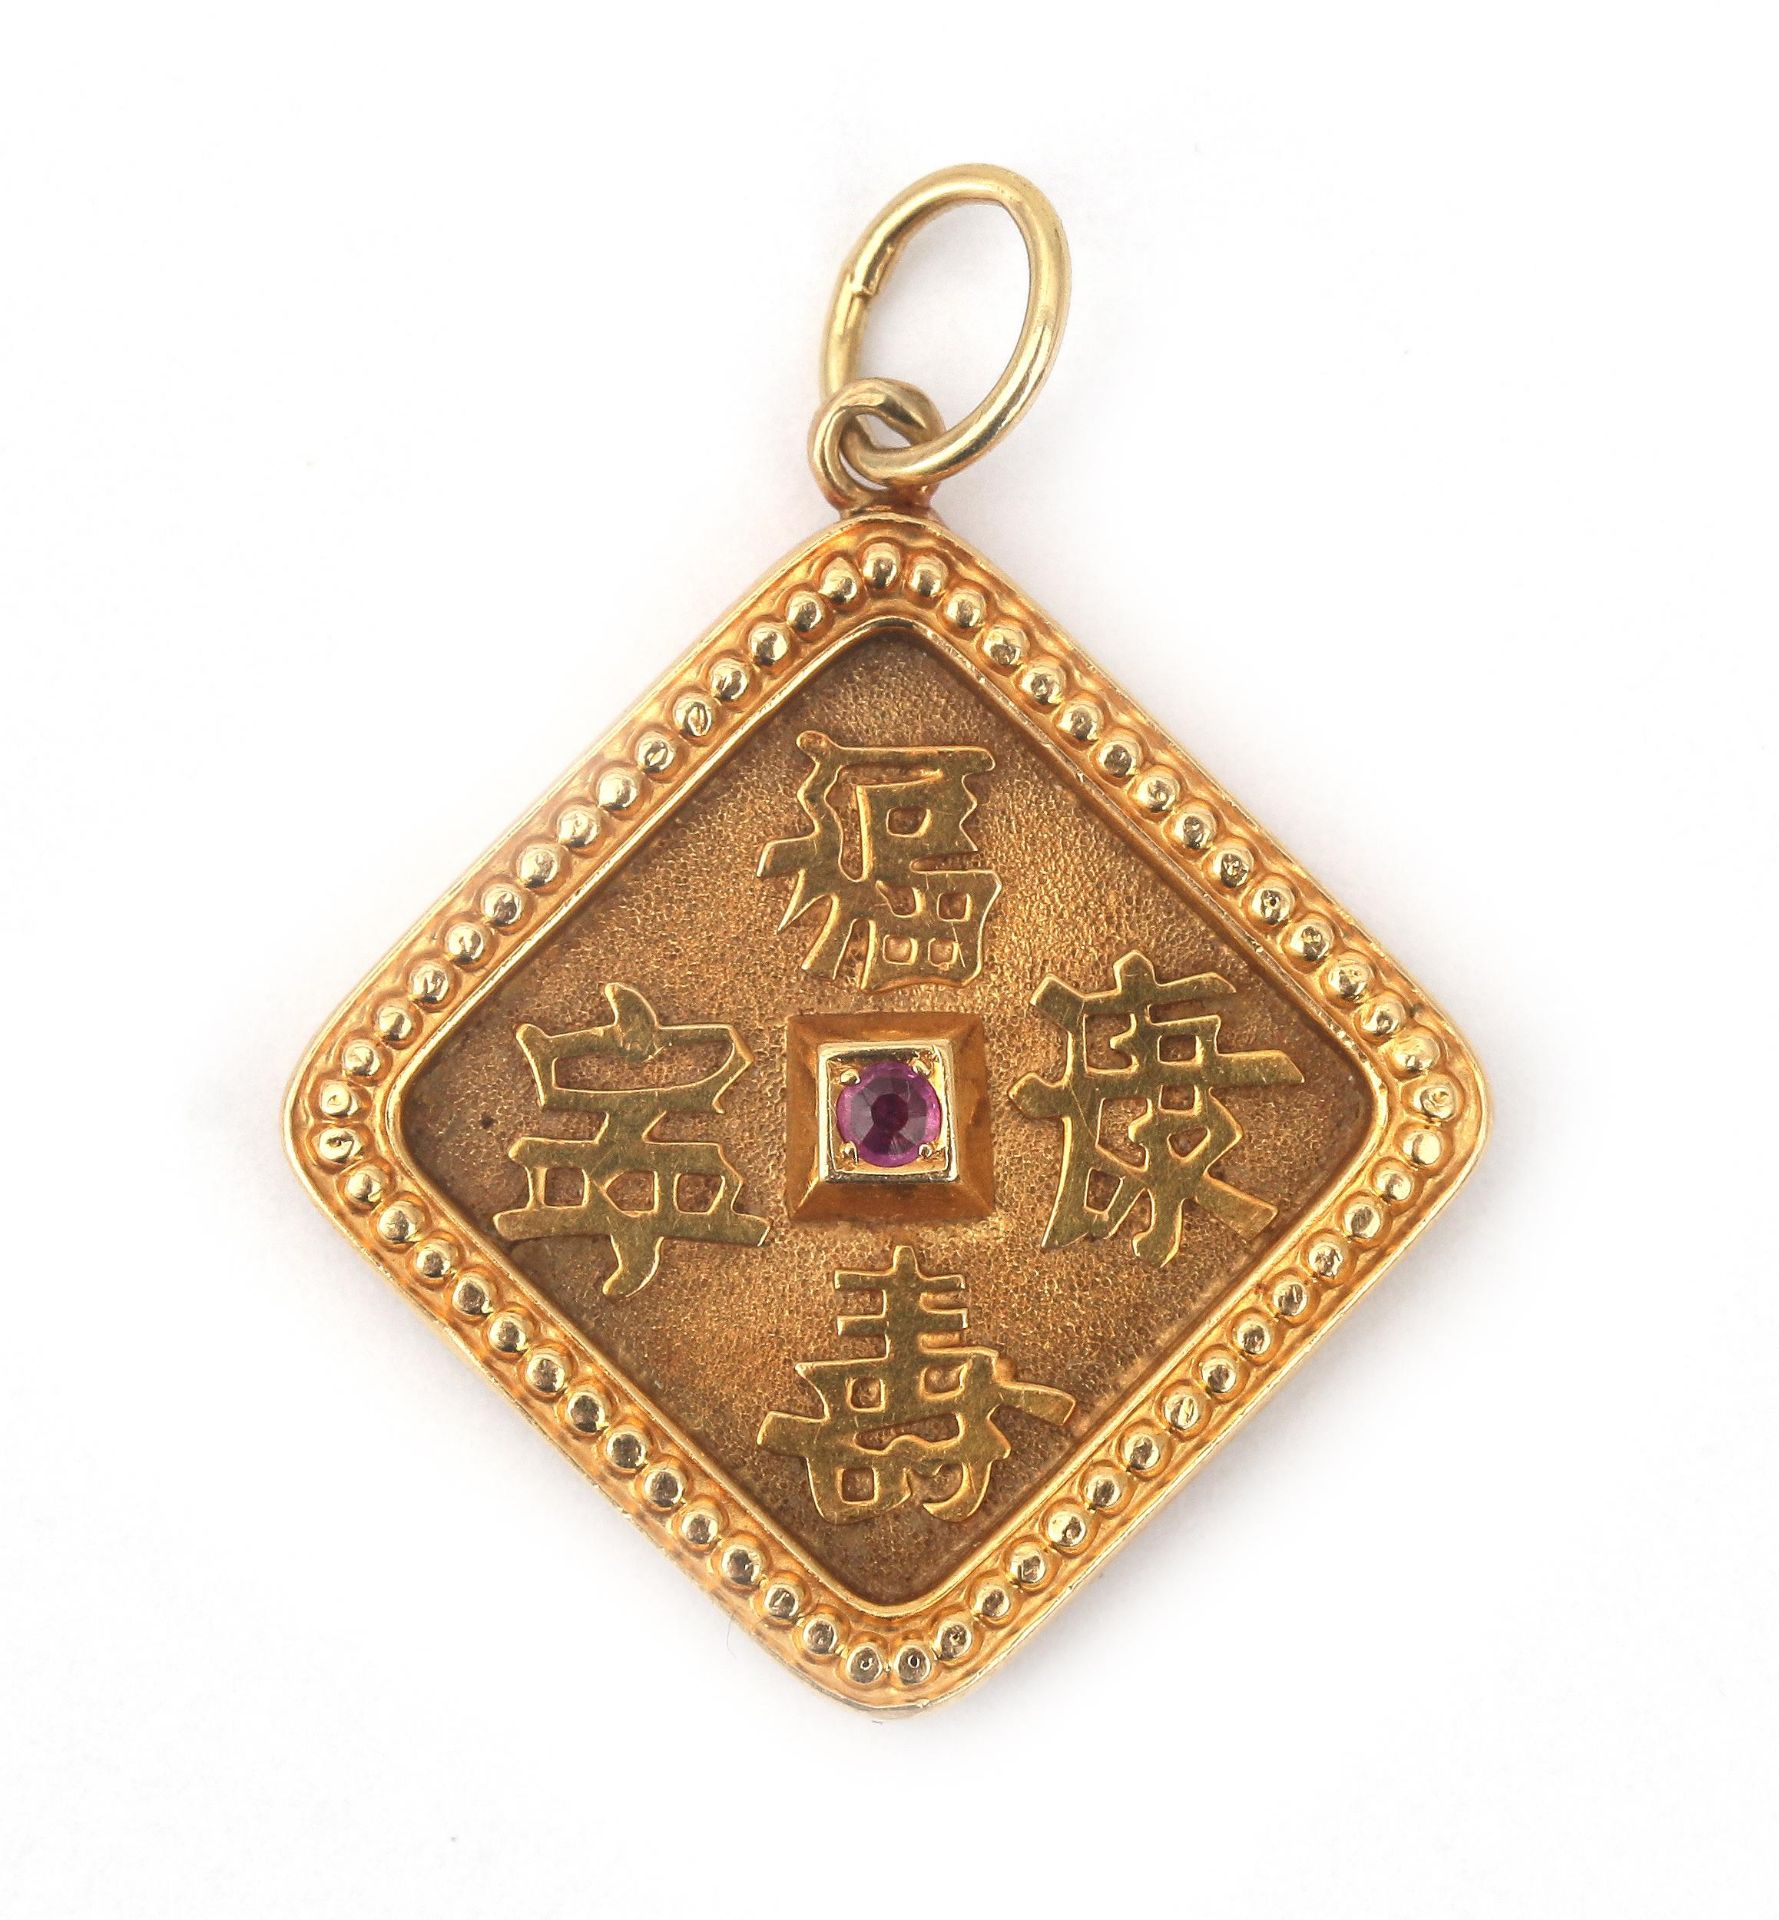 A 14 karat gold pendant with Chinese characters